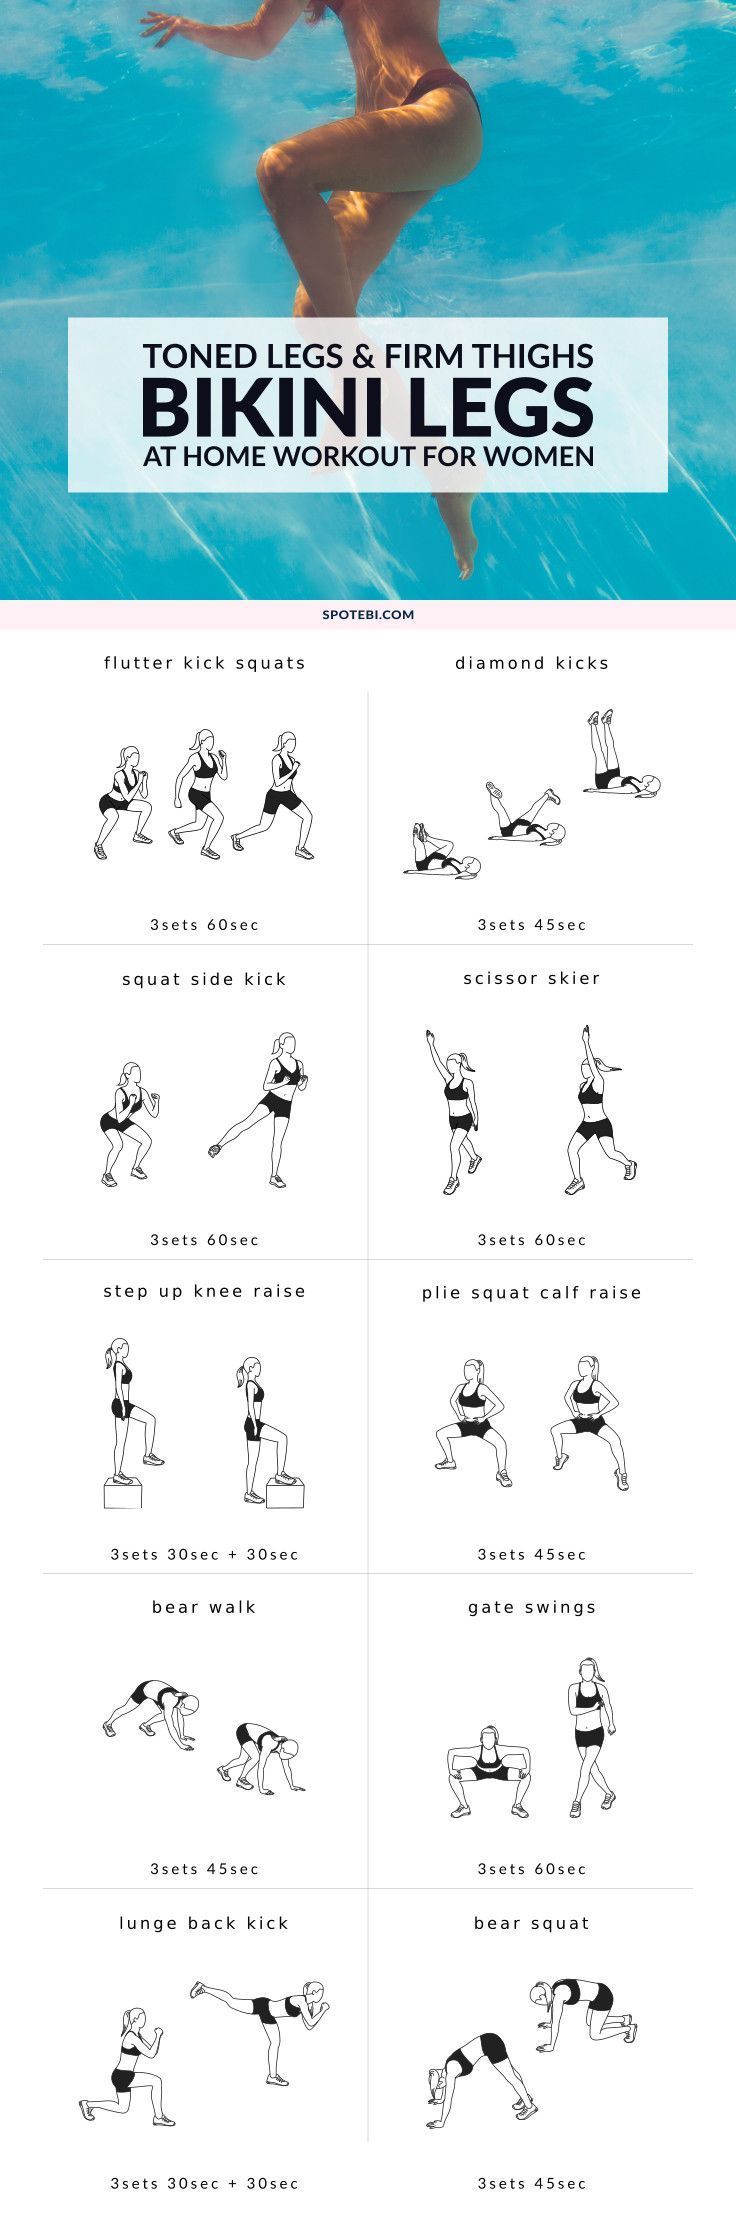 Build shapely legs and firm up your thighs with this bikini body leg workout for women! A set of 10 exercises to target your inner